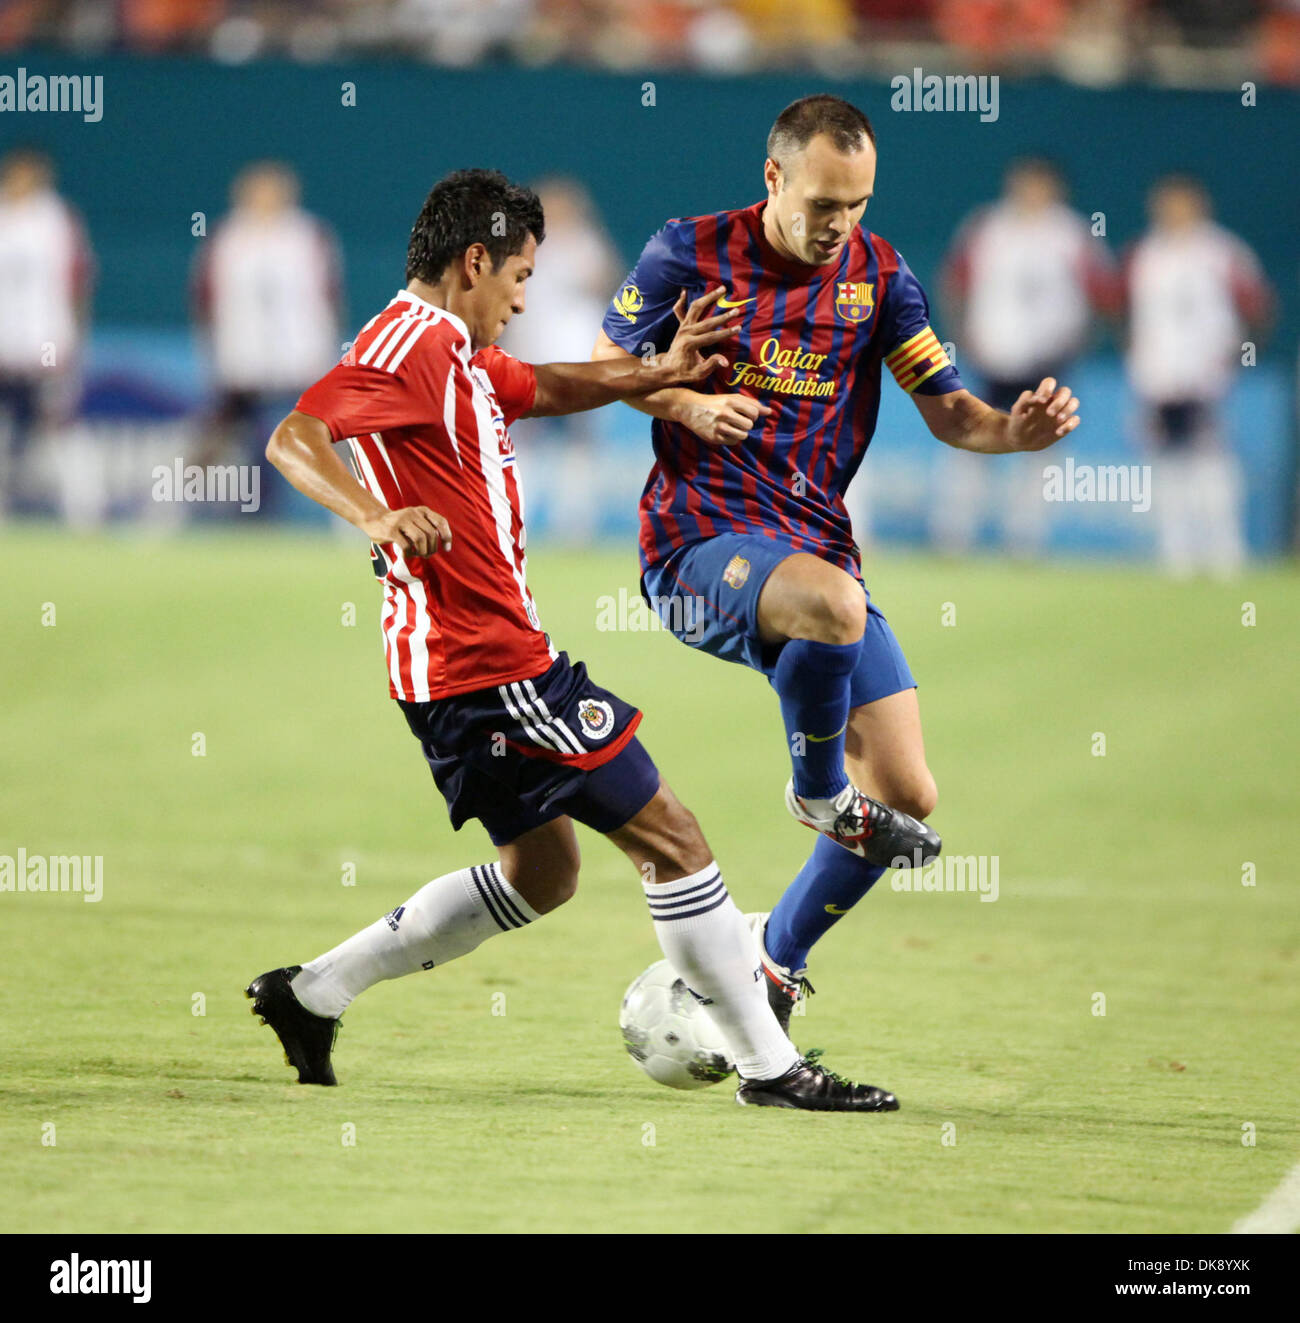 Aug. 3, 2011 - Miami Gardens, Florida, U.S - Barcelona midfielder Andres Iniesta (8) in action during the World Challenge Cup at Sun Life Stadium in Miami Gardens, Florida.Chivas defected Barcelona with score of 4-1 (Credit Image: © Luis Blanco/Southcreek Global/ZUMApress.com) Stock Photo